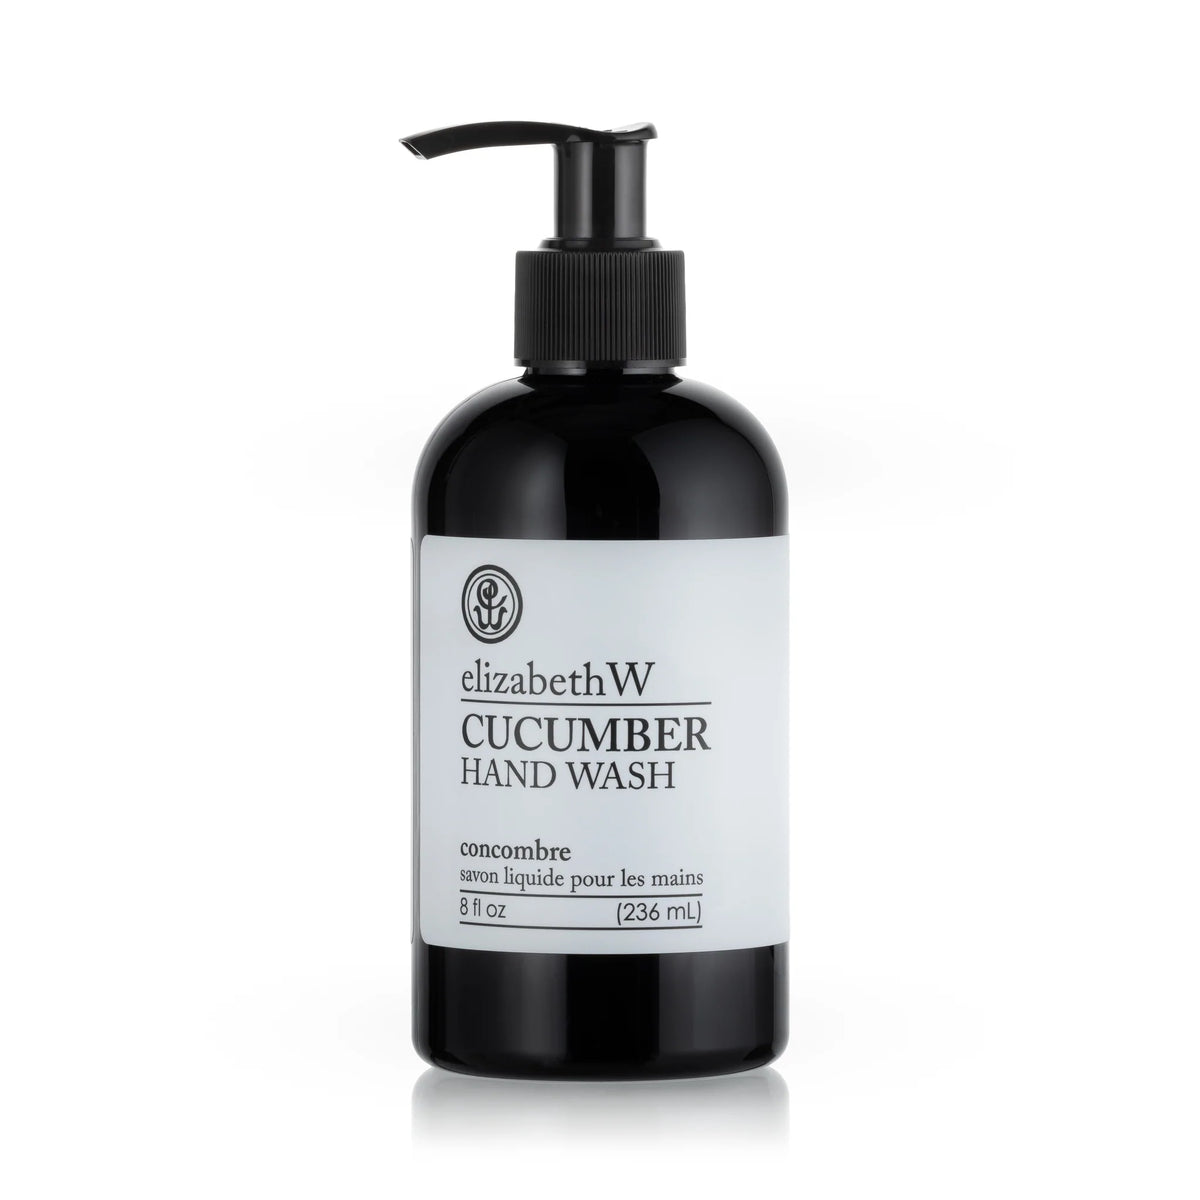 A black pump bottle of elizabeth W Purely Essential Cucumber Hand Wash, labeled in white, isolated on a white background.